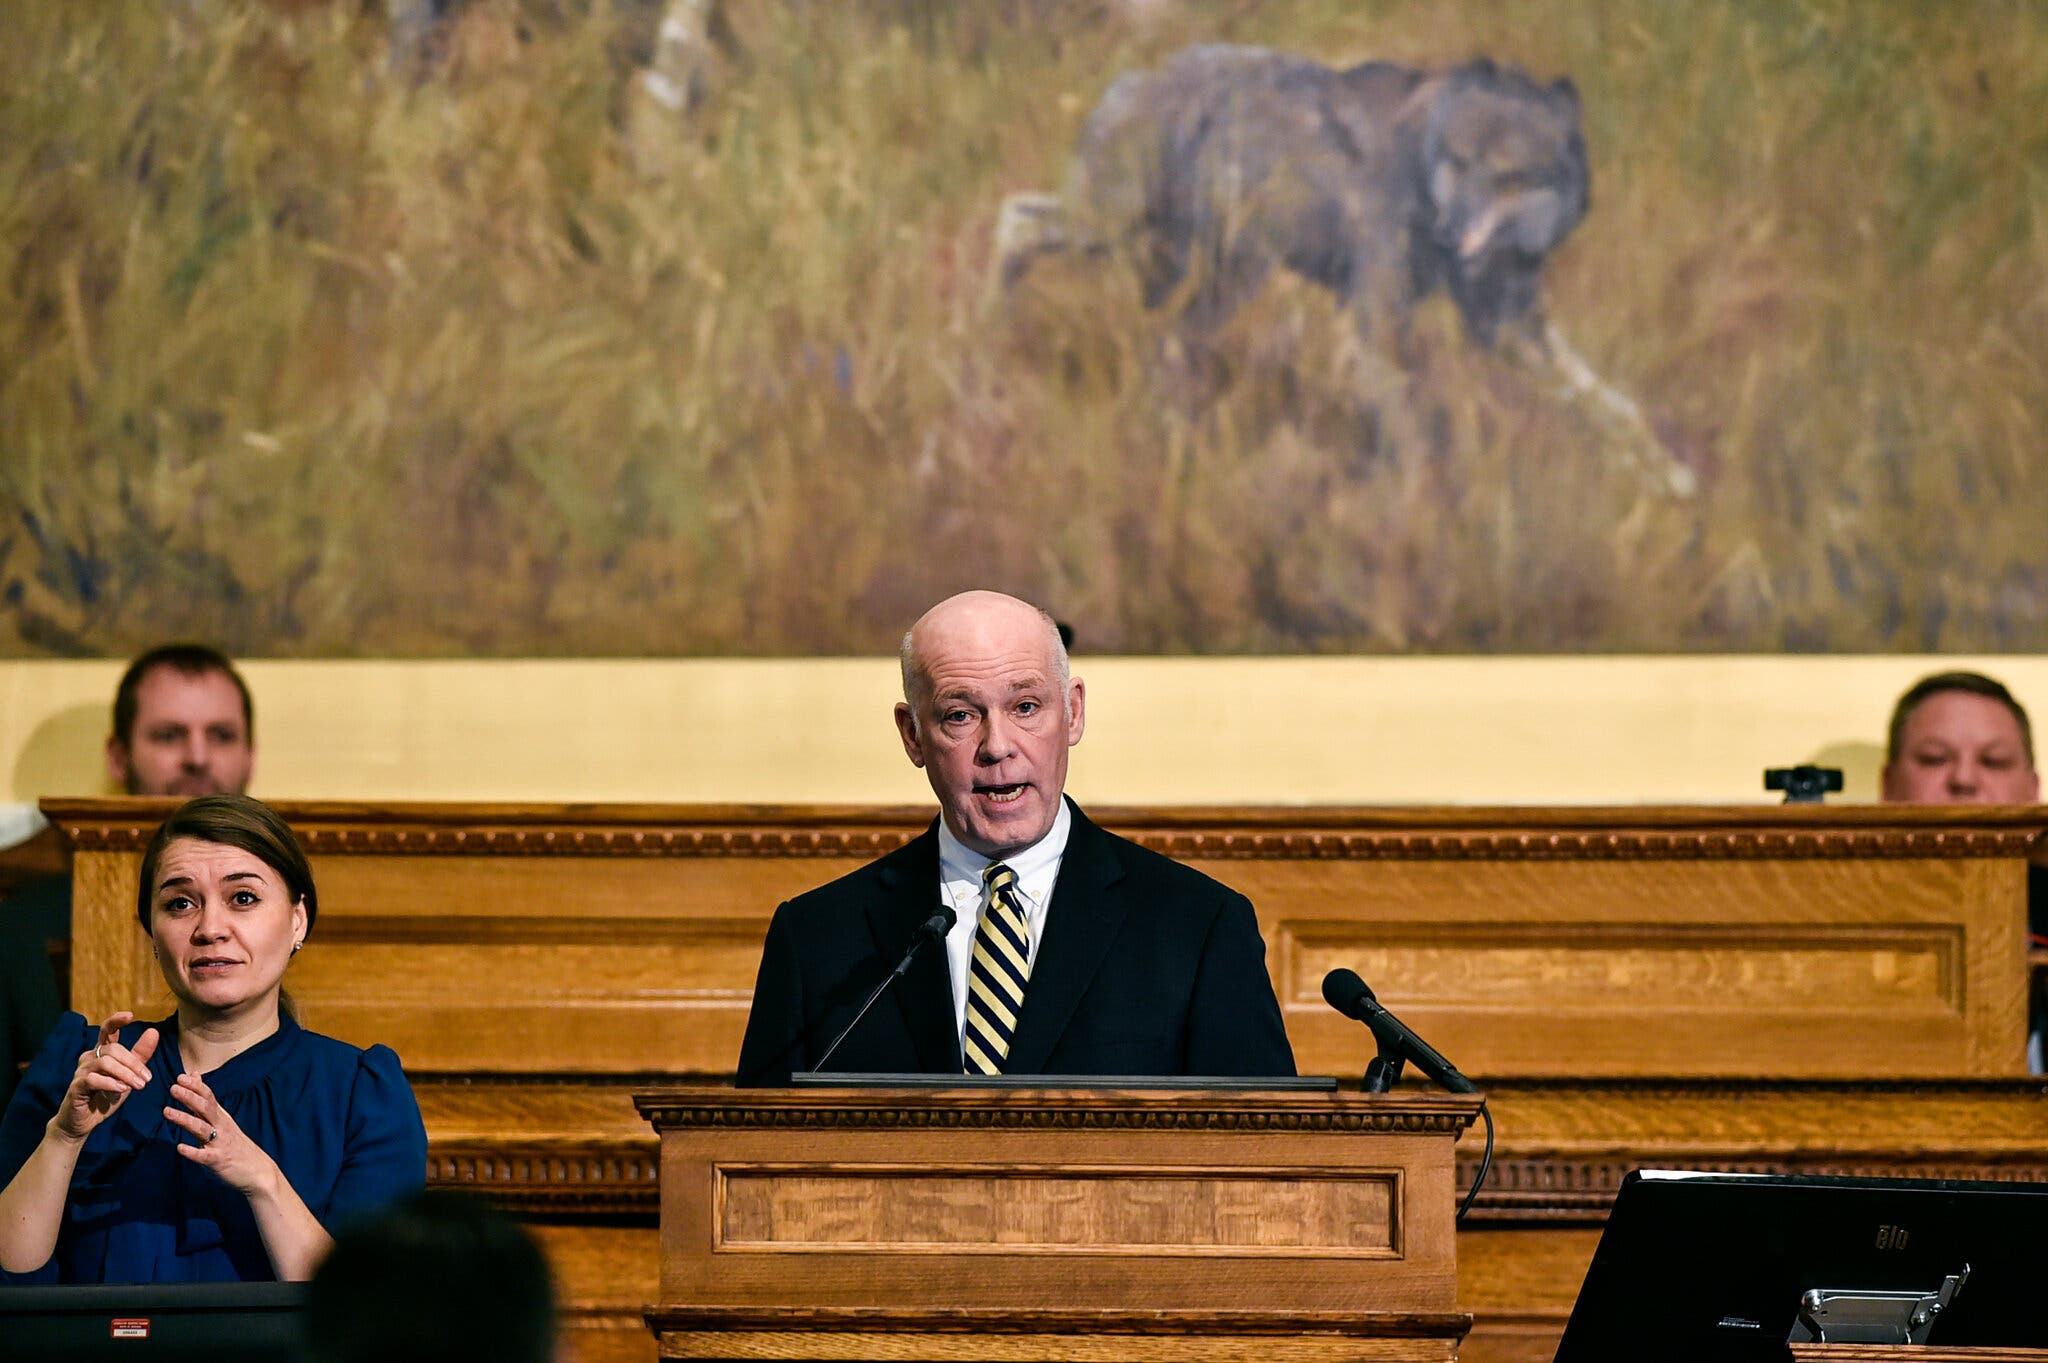 Montana’s Plan To Ban TikTok Is A Preview For The Rest Of The Country